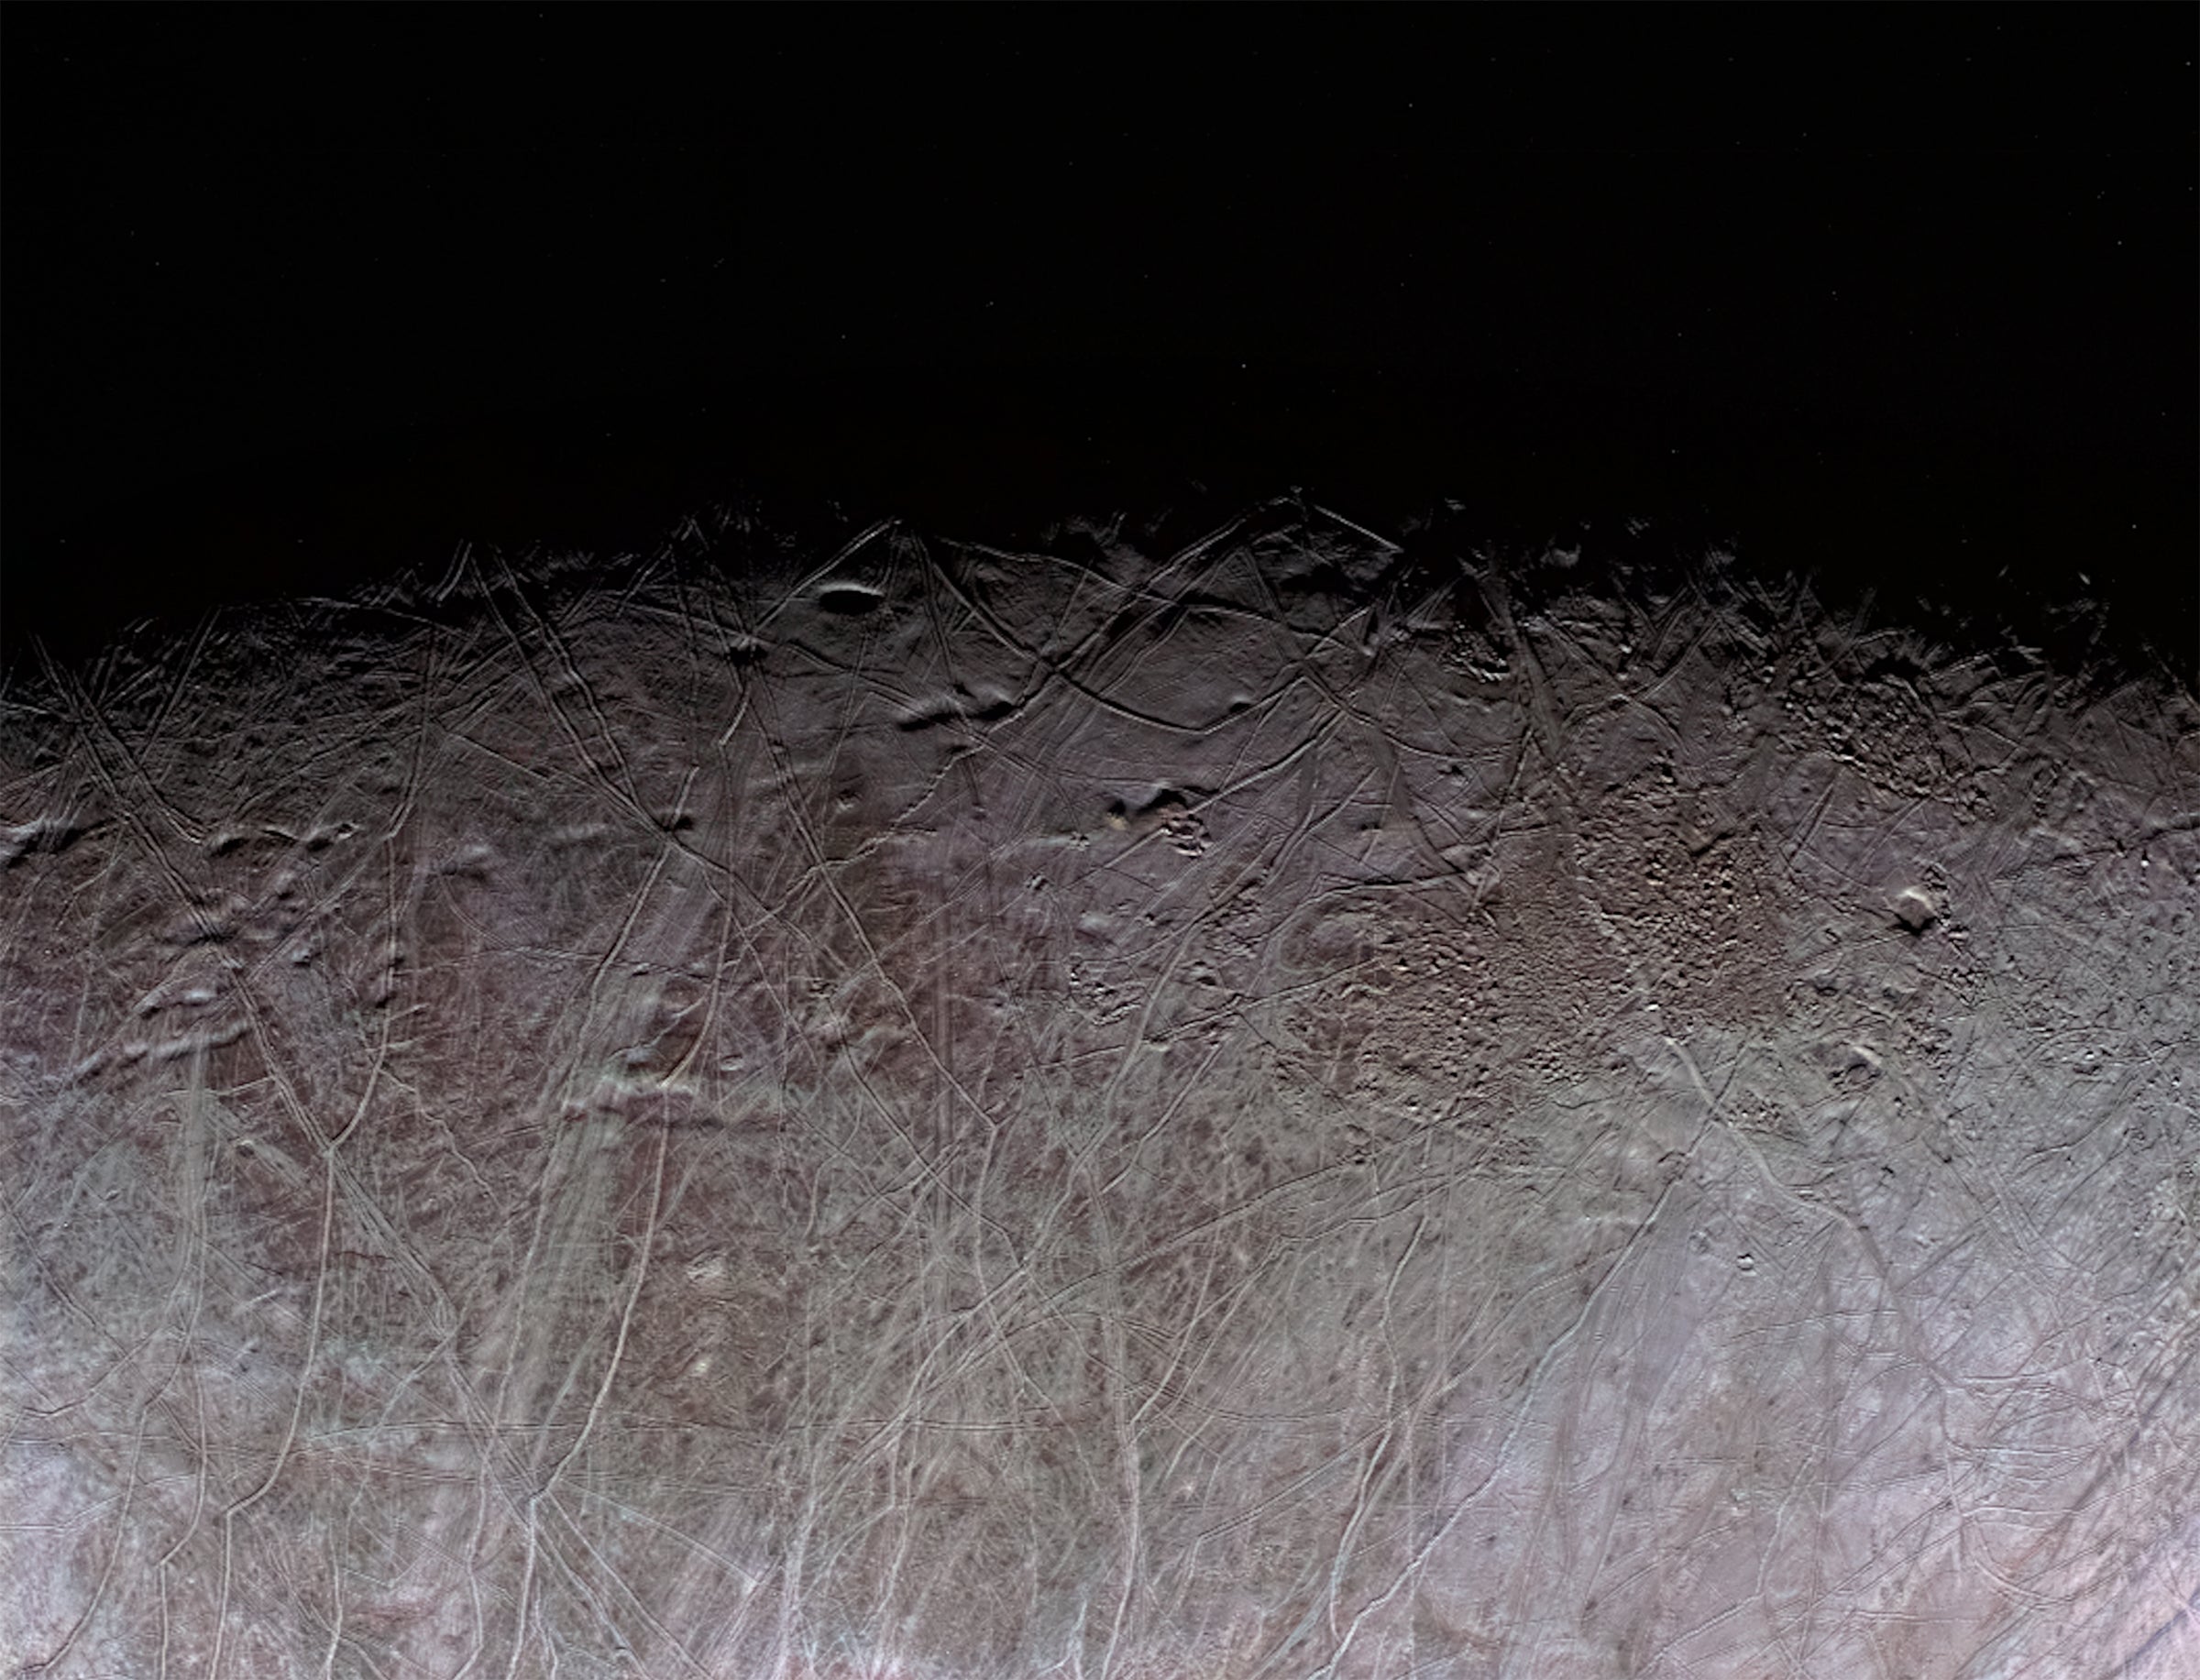 Shadows along the terminator, or day-night boundary, help to reveal some of Europa's distinctive surface features, such as fractures and pits, and indicate that the moon is geologically active.